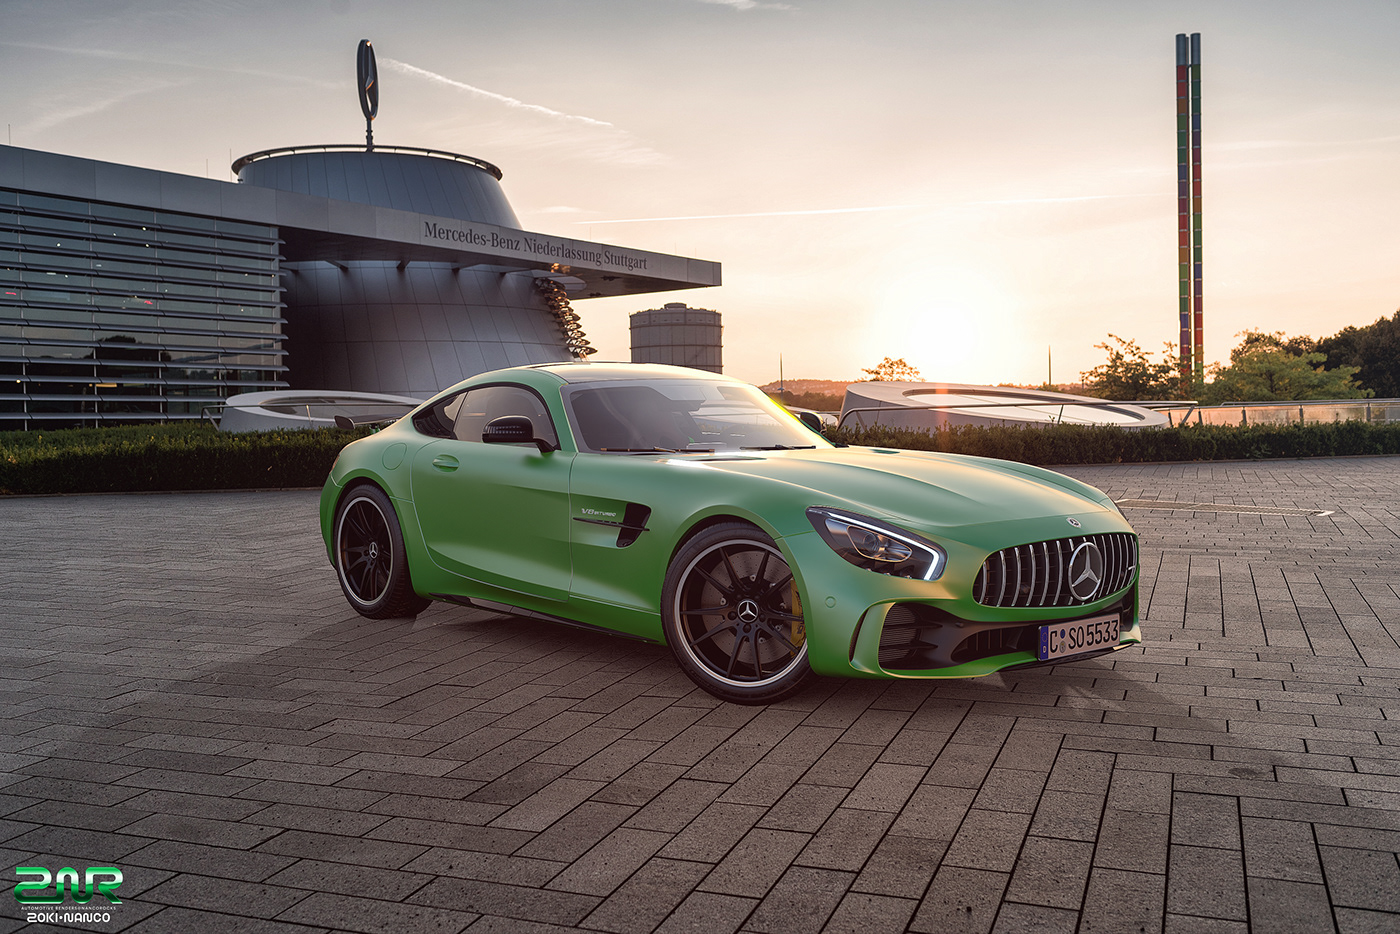 #3d #cg #cgi #mercedes #benz #amg #gtr #render #concept #prototype #supercar #hypercar #future #racing #custom #unique #track #wide #performance #coupe #road #luxury